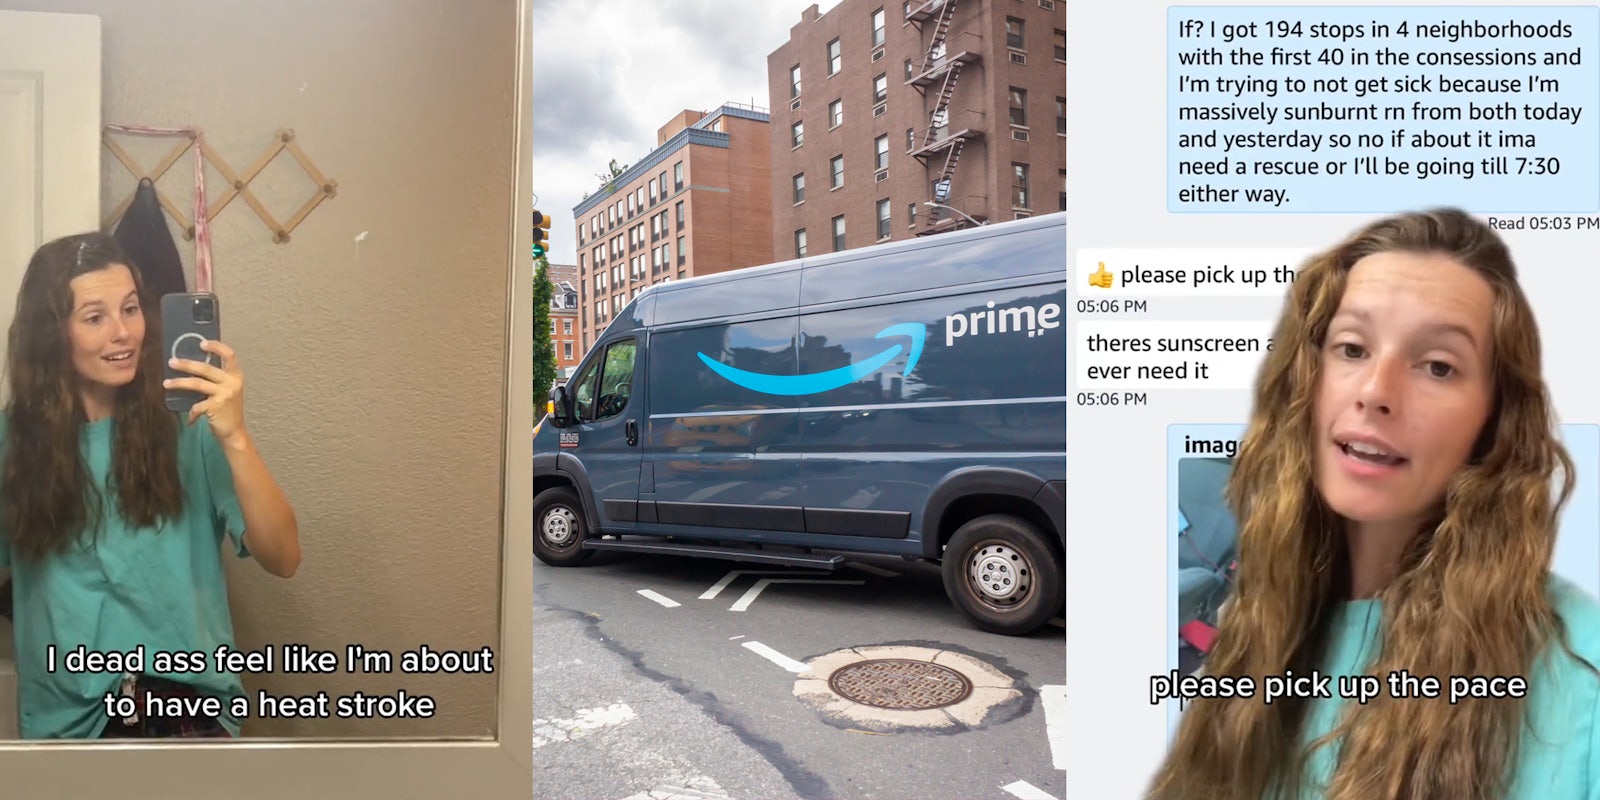 Amazon driver speaking in mirror with caption 'I dead ass feel like I'm about to have a heat stroke' (l) Amazon Prime truck in street (c) Amazon driver greenscreen TikTok over messages 'If? I got 194 stops in 4 neighborhoods with the first 40 in the consessions and I'm trying to not get sick because I'm massively sunburnt rn both today and yesterday so no if about it ima need a rescue or I'll be going till 7:30 either way. please pick up the pace' with caption 'please pick up the pace' (r)